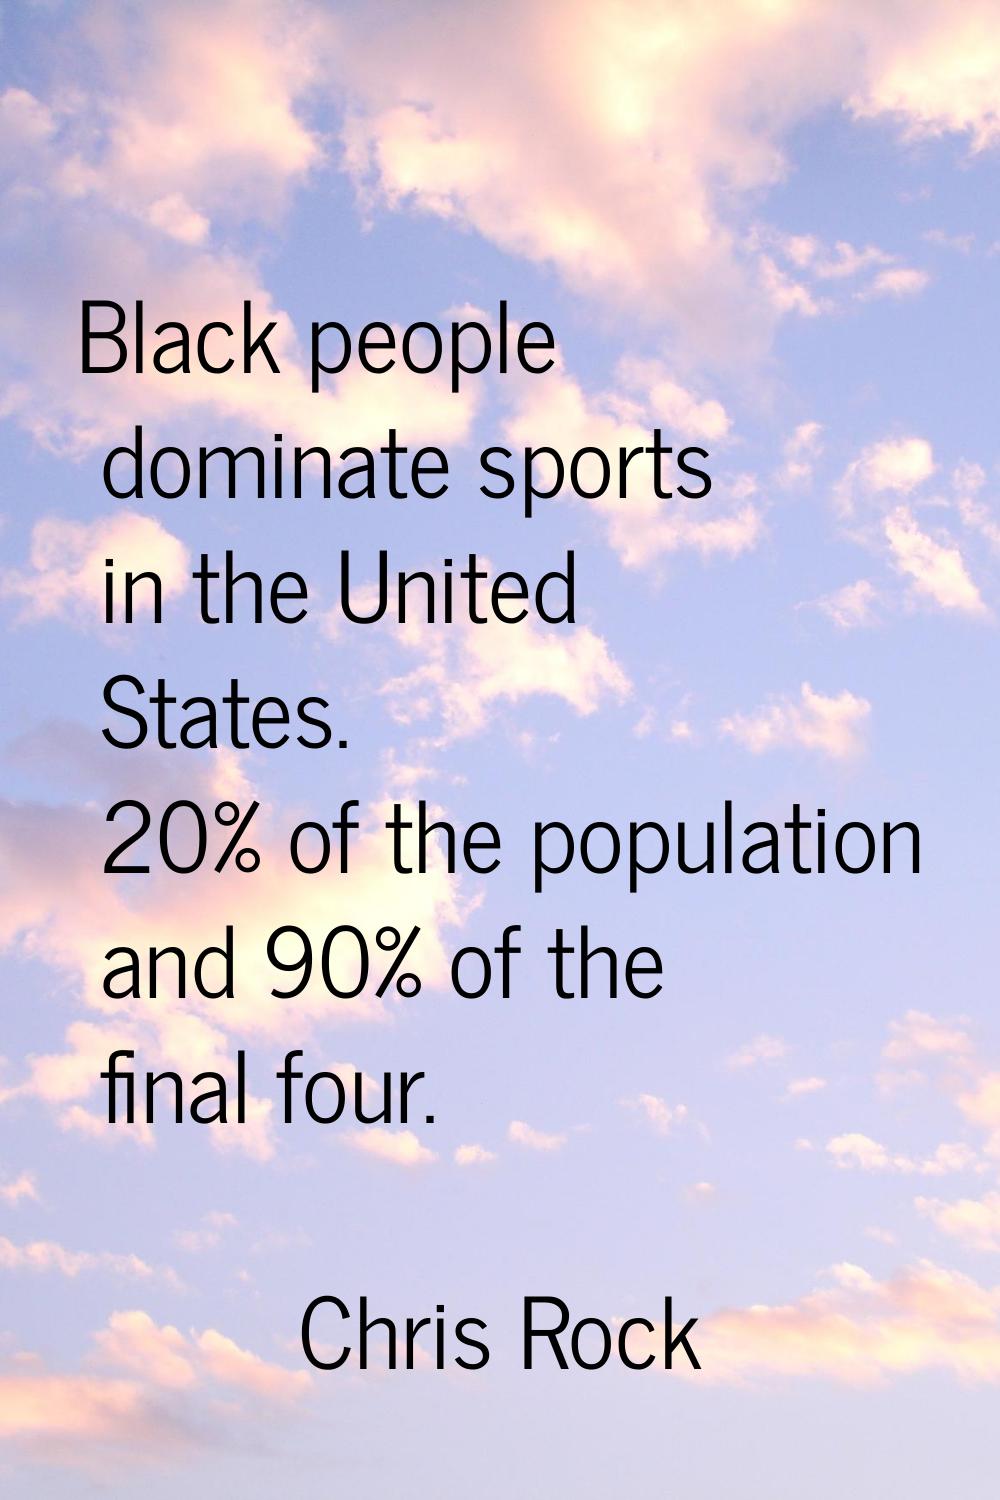 Black people dominate sports in the United States. 20% of the population and 90% of the final four.